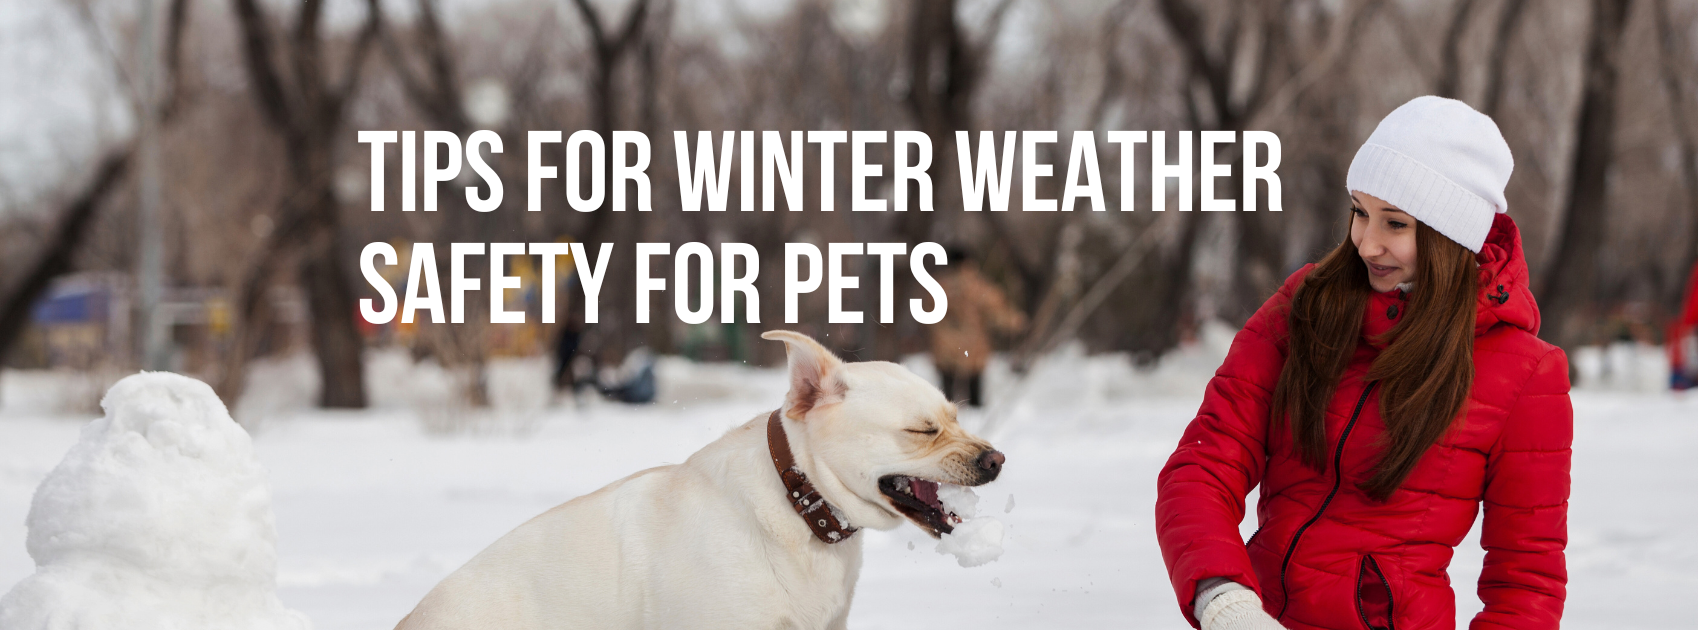 Tips for Winter Weather Safety for Pets